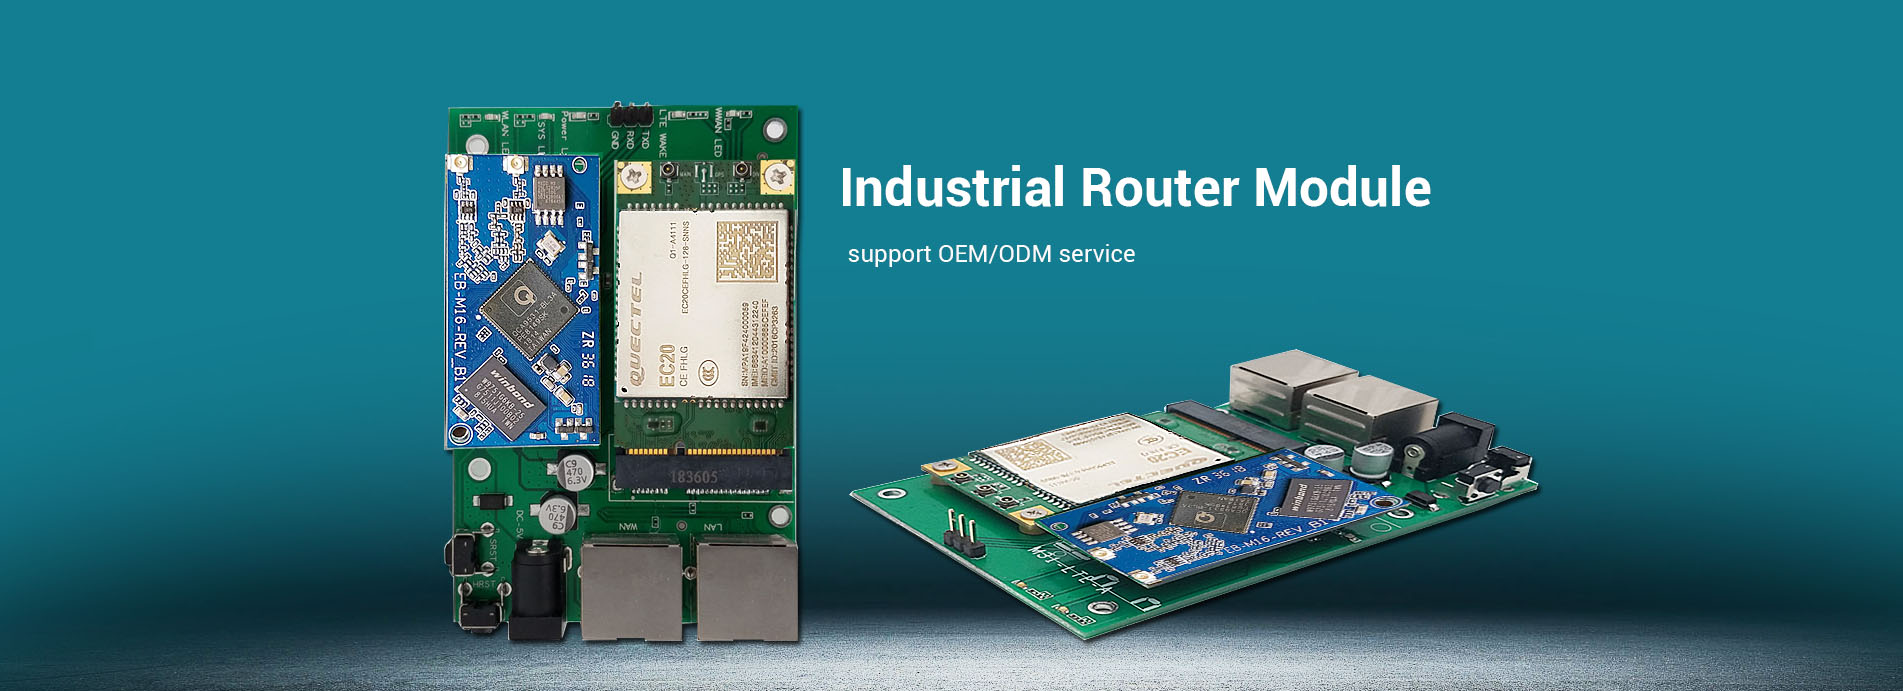 Industrial Router Module